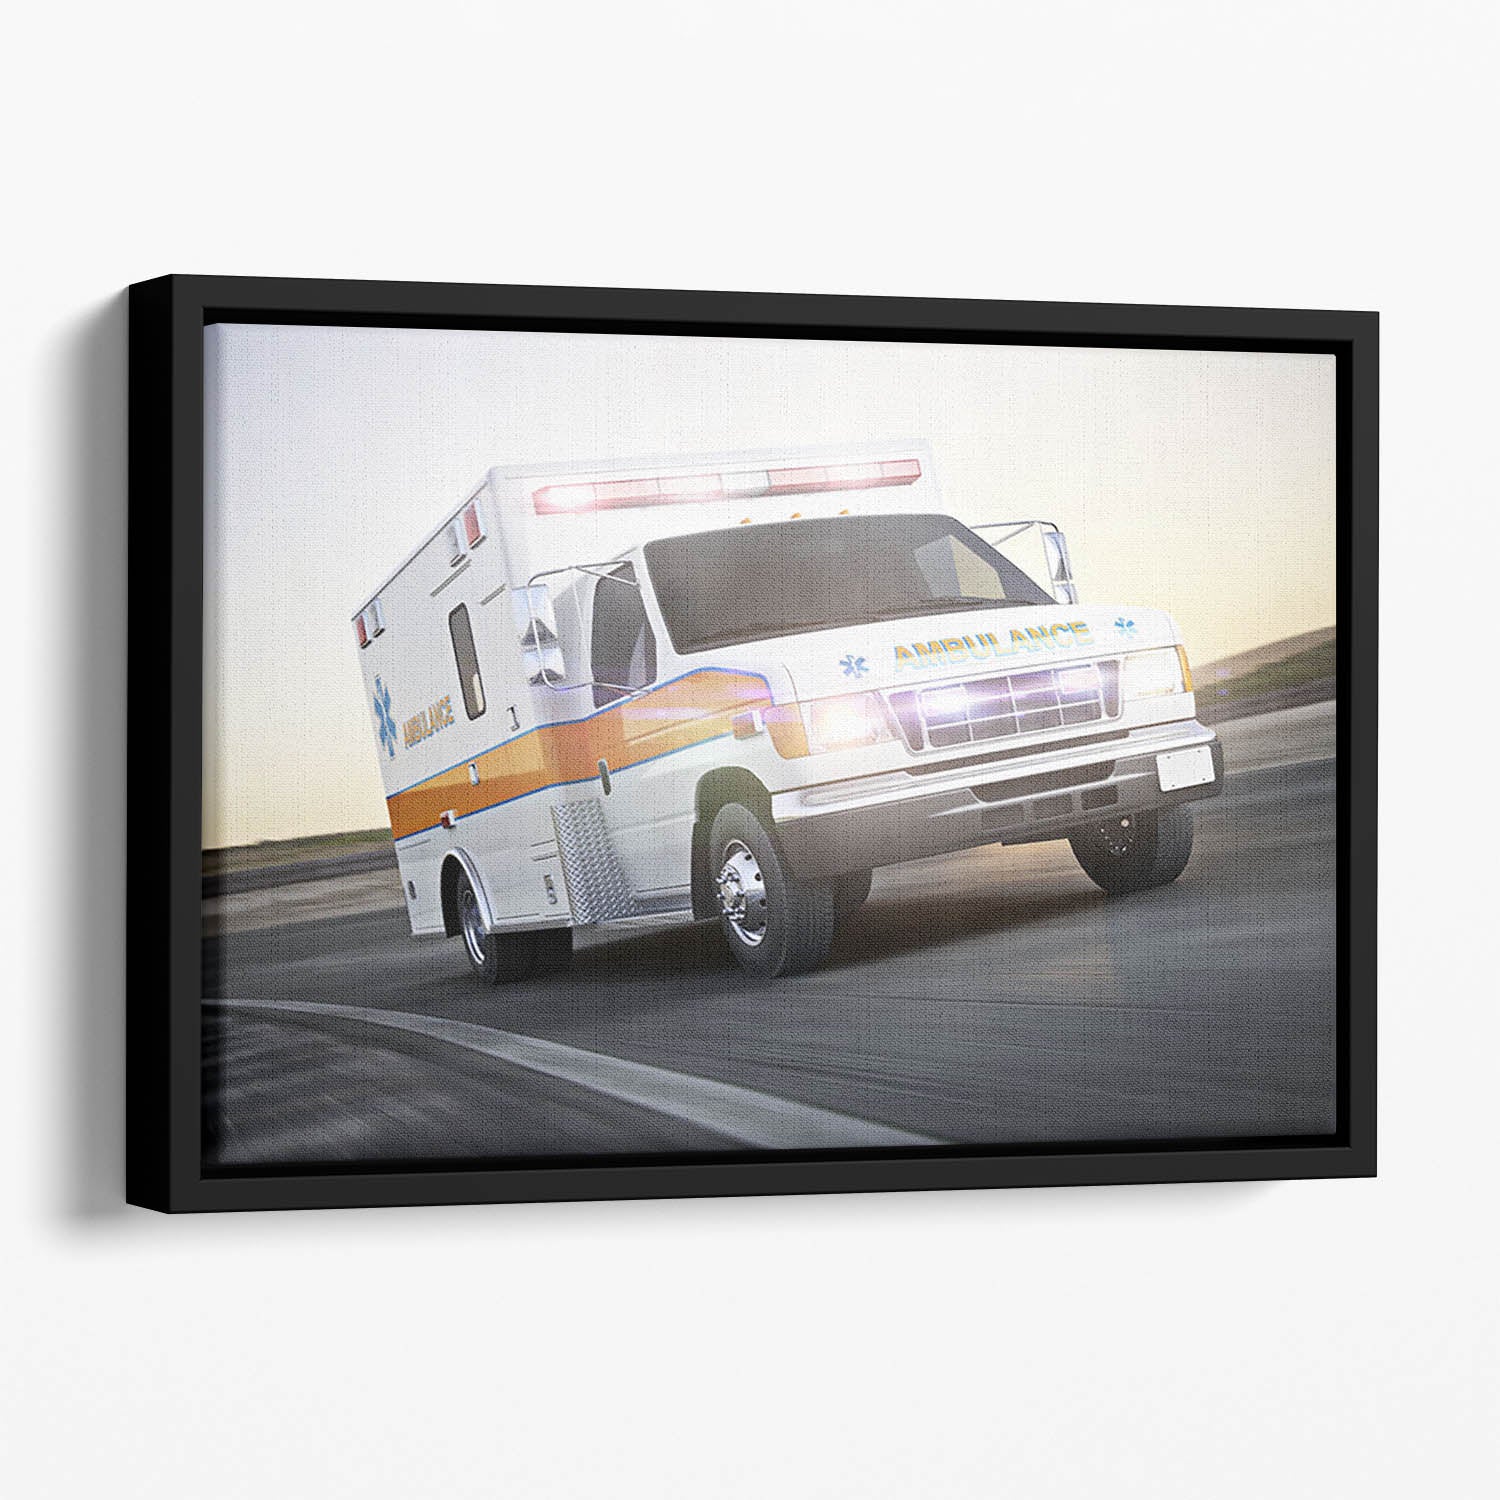 Ambulance running with lights and sirens Floating Framed Canvas